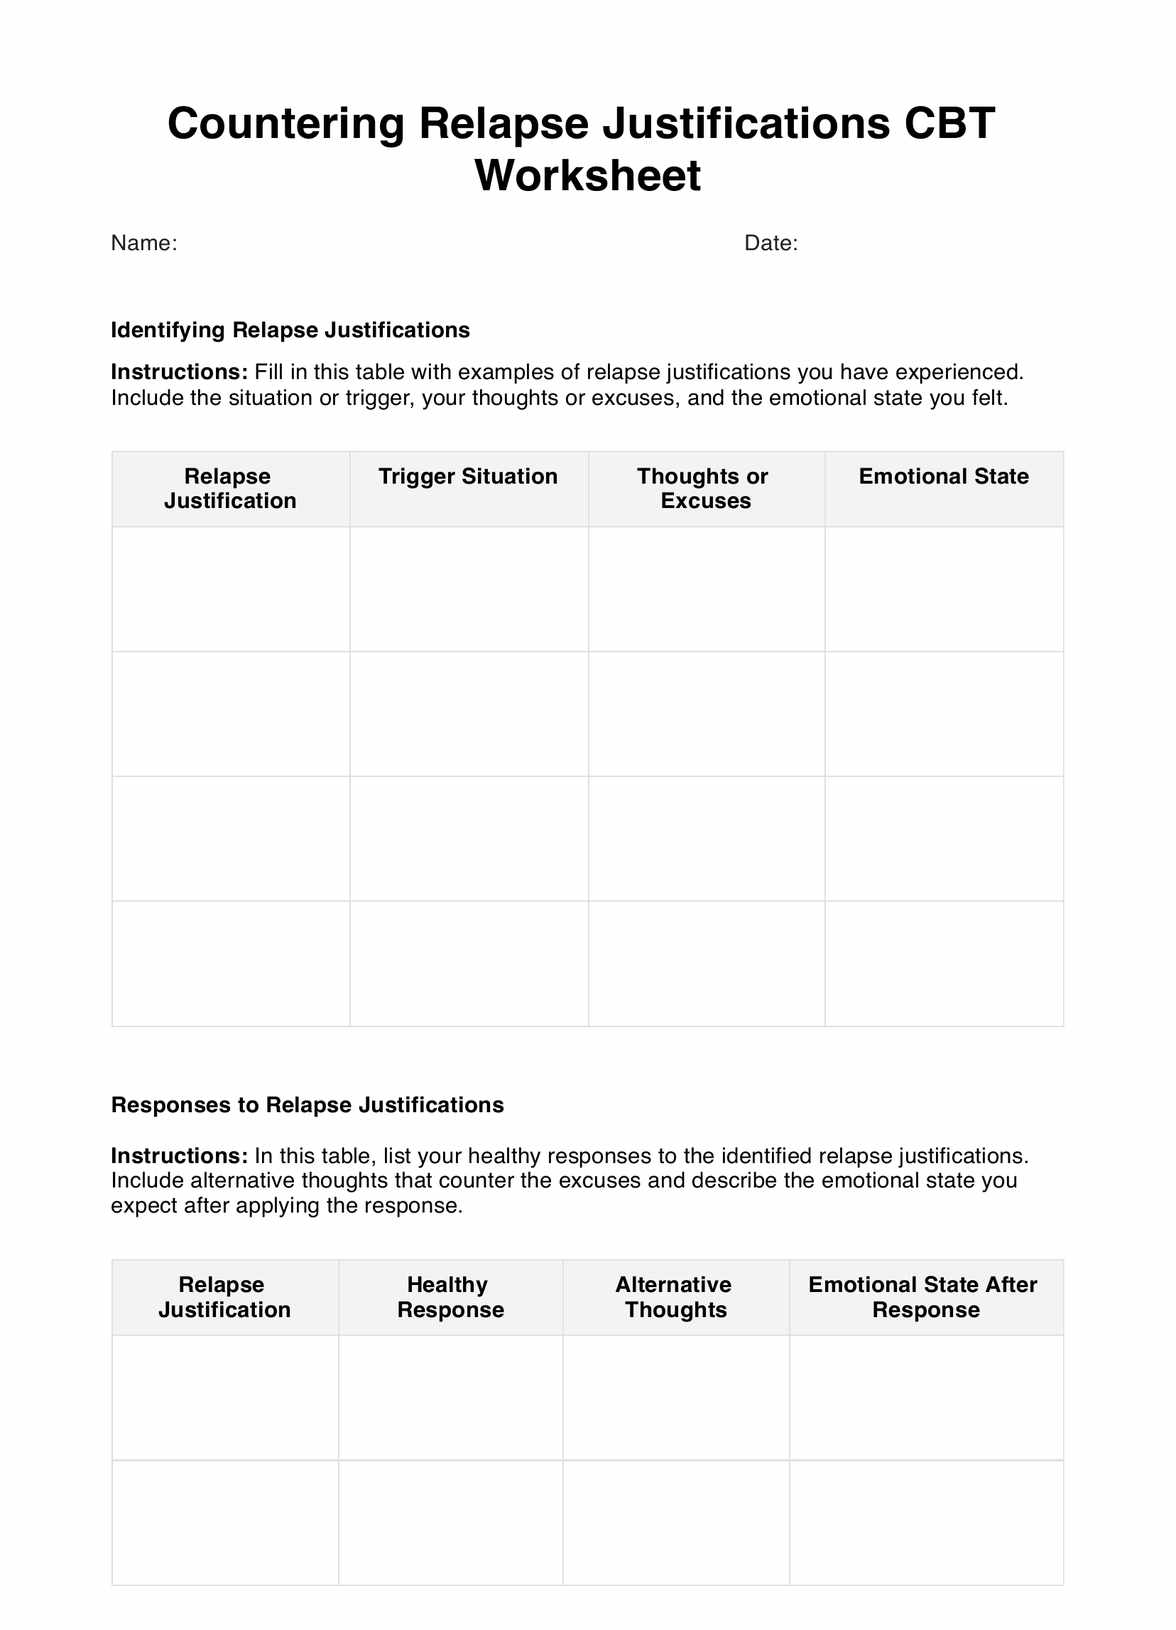 Countering Relapse Justifications CBT Worksheet PDF Example